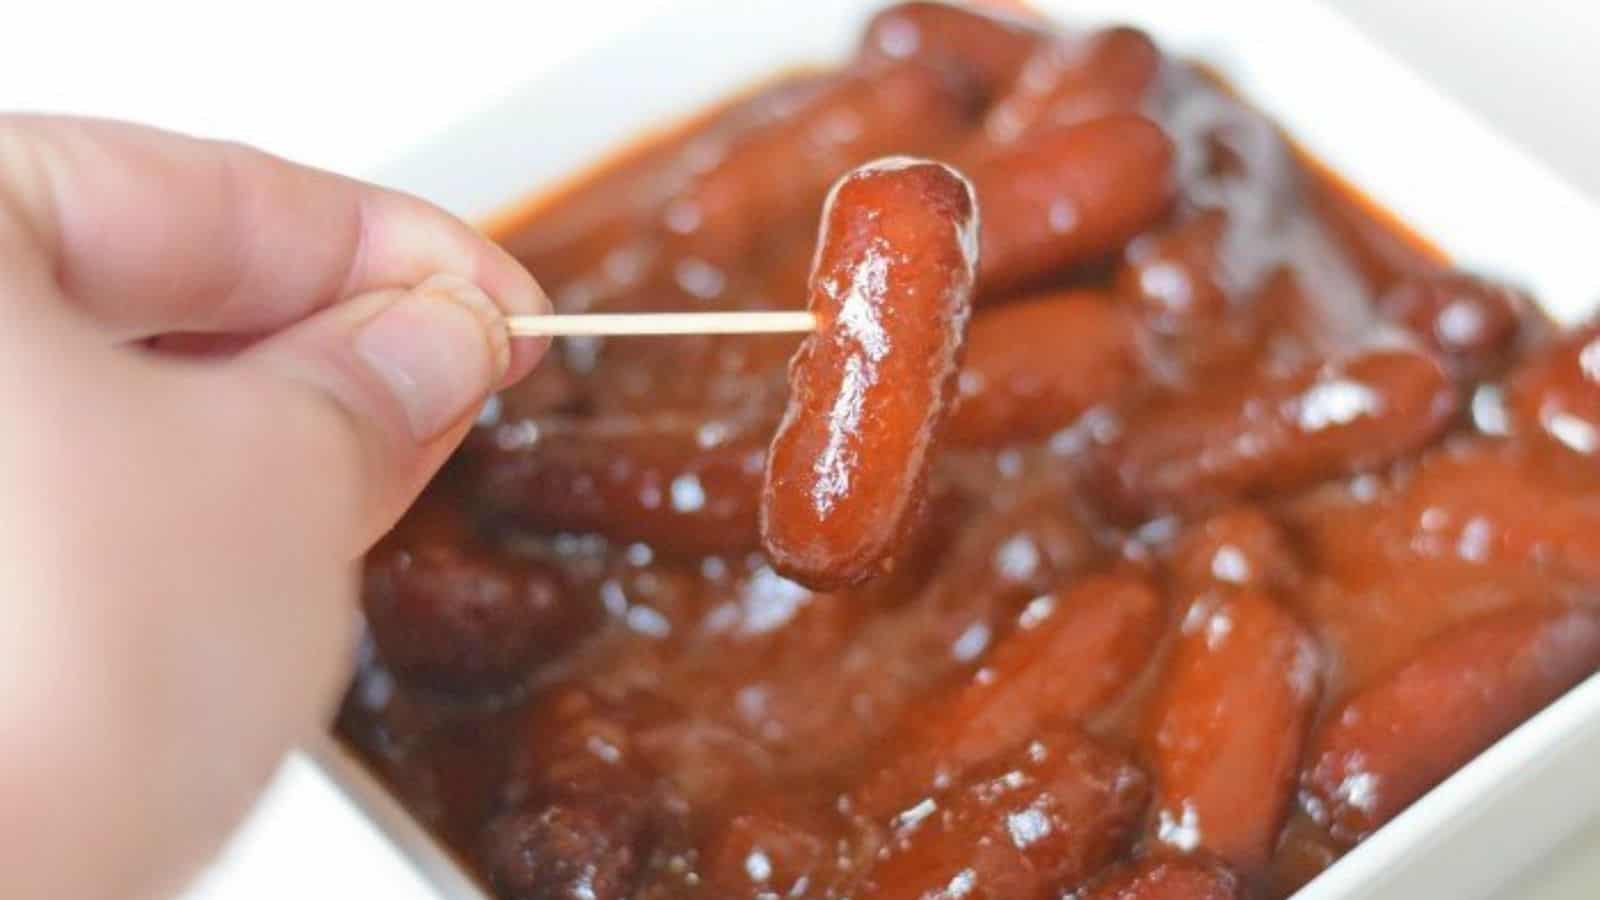 Image shows A person is holding a toothpick with a little smokie over a bowl filled with more bbq bourbon little smokies.